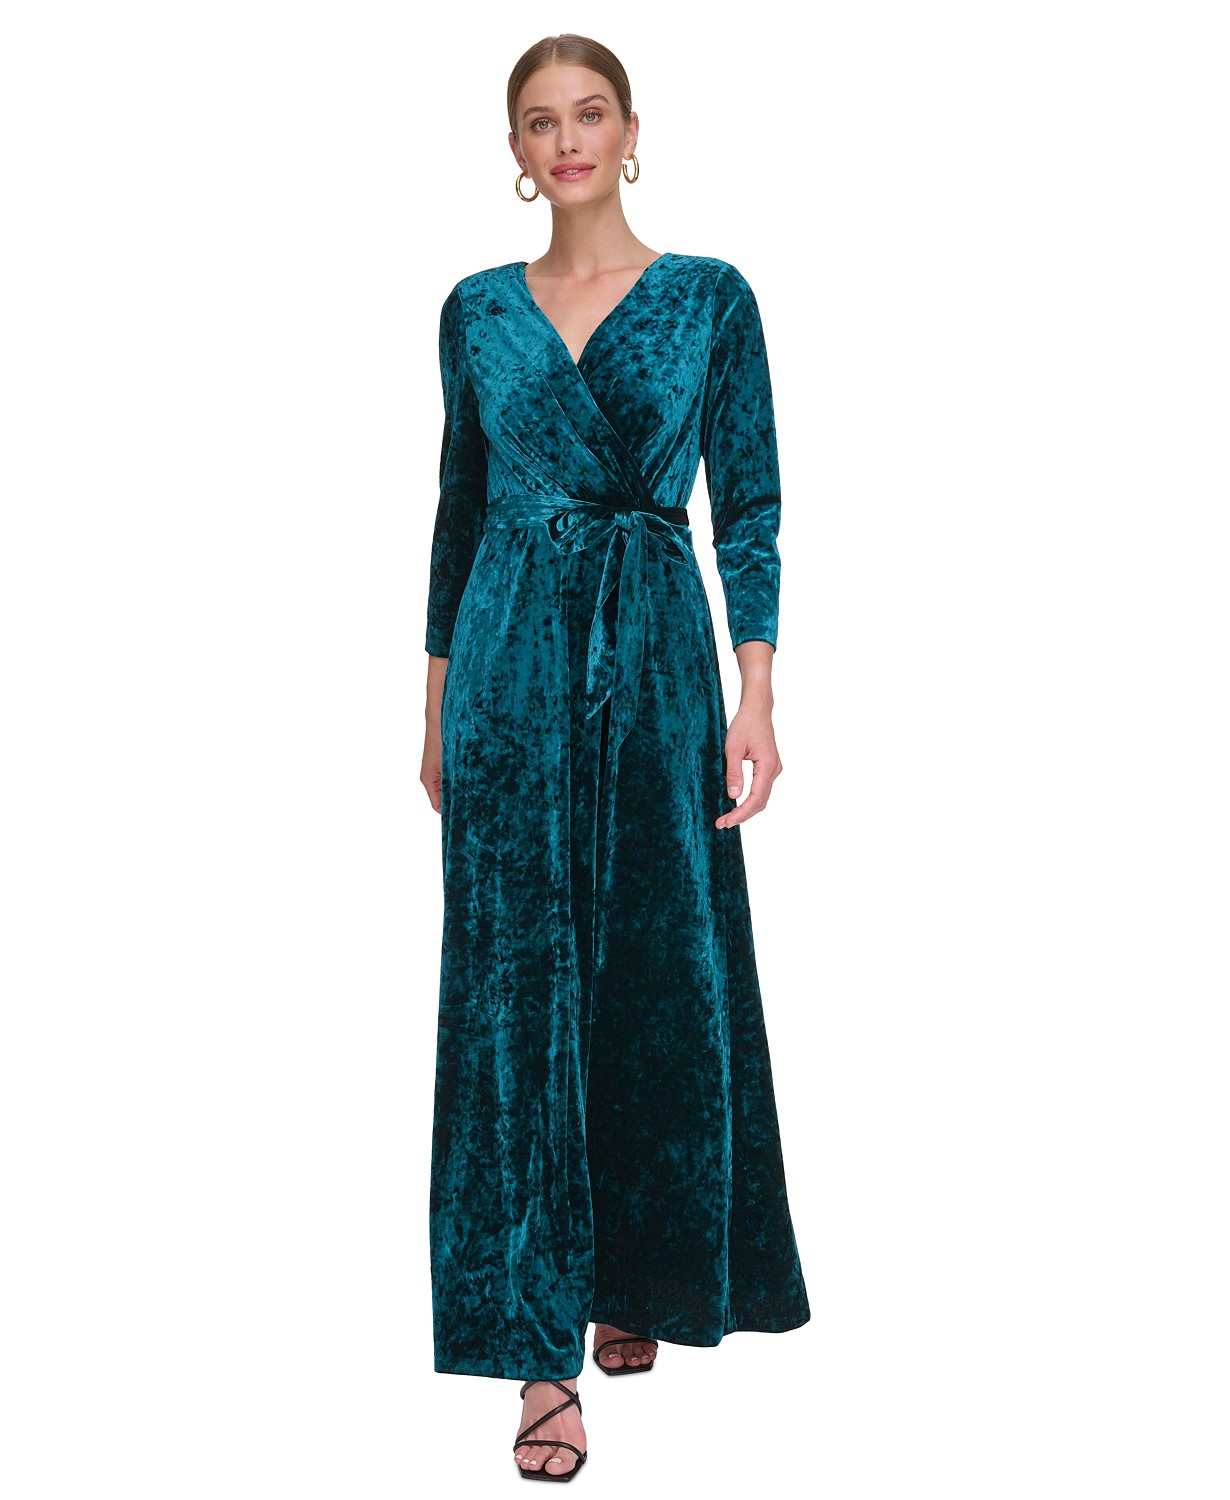 DKNY Womens Crushed-Velvet Belted Faux-Wrap Gown